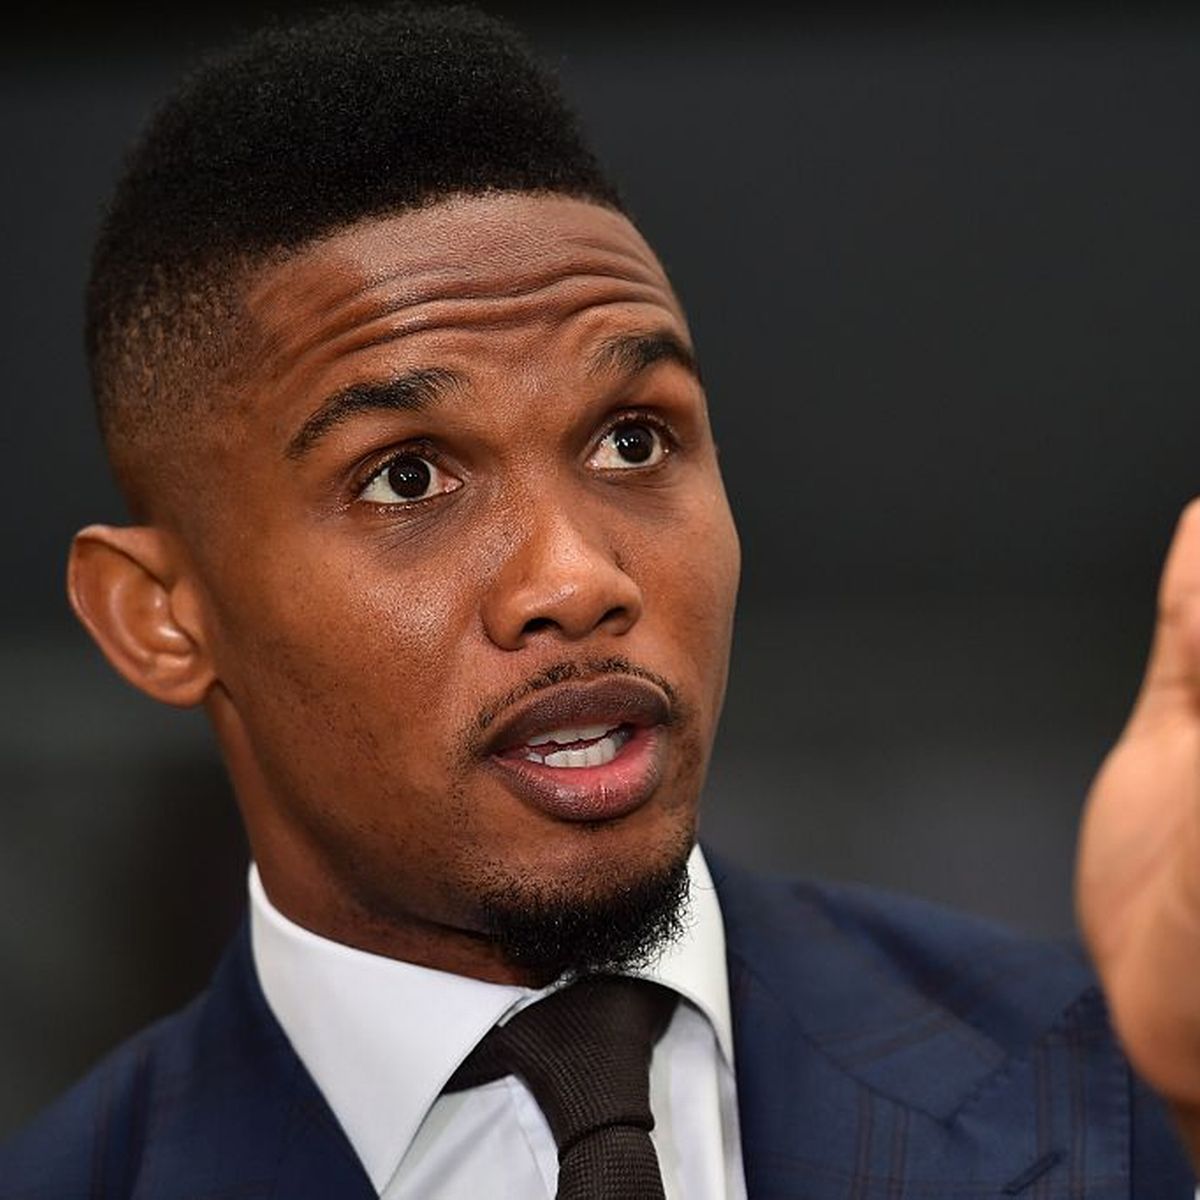 AFCON 2023: Cameroon FA rejects Samuel Eto’o’s resignation as president